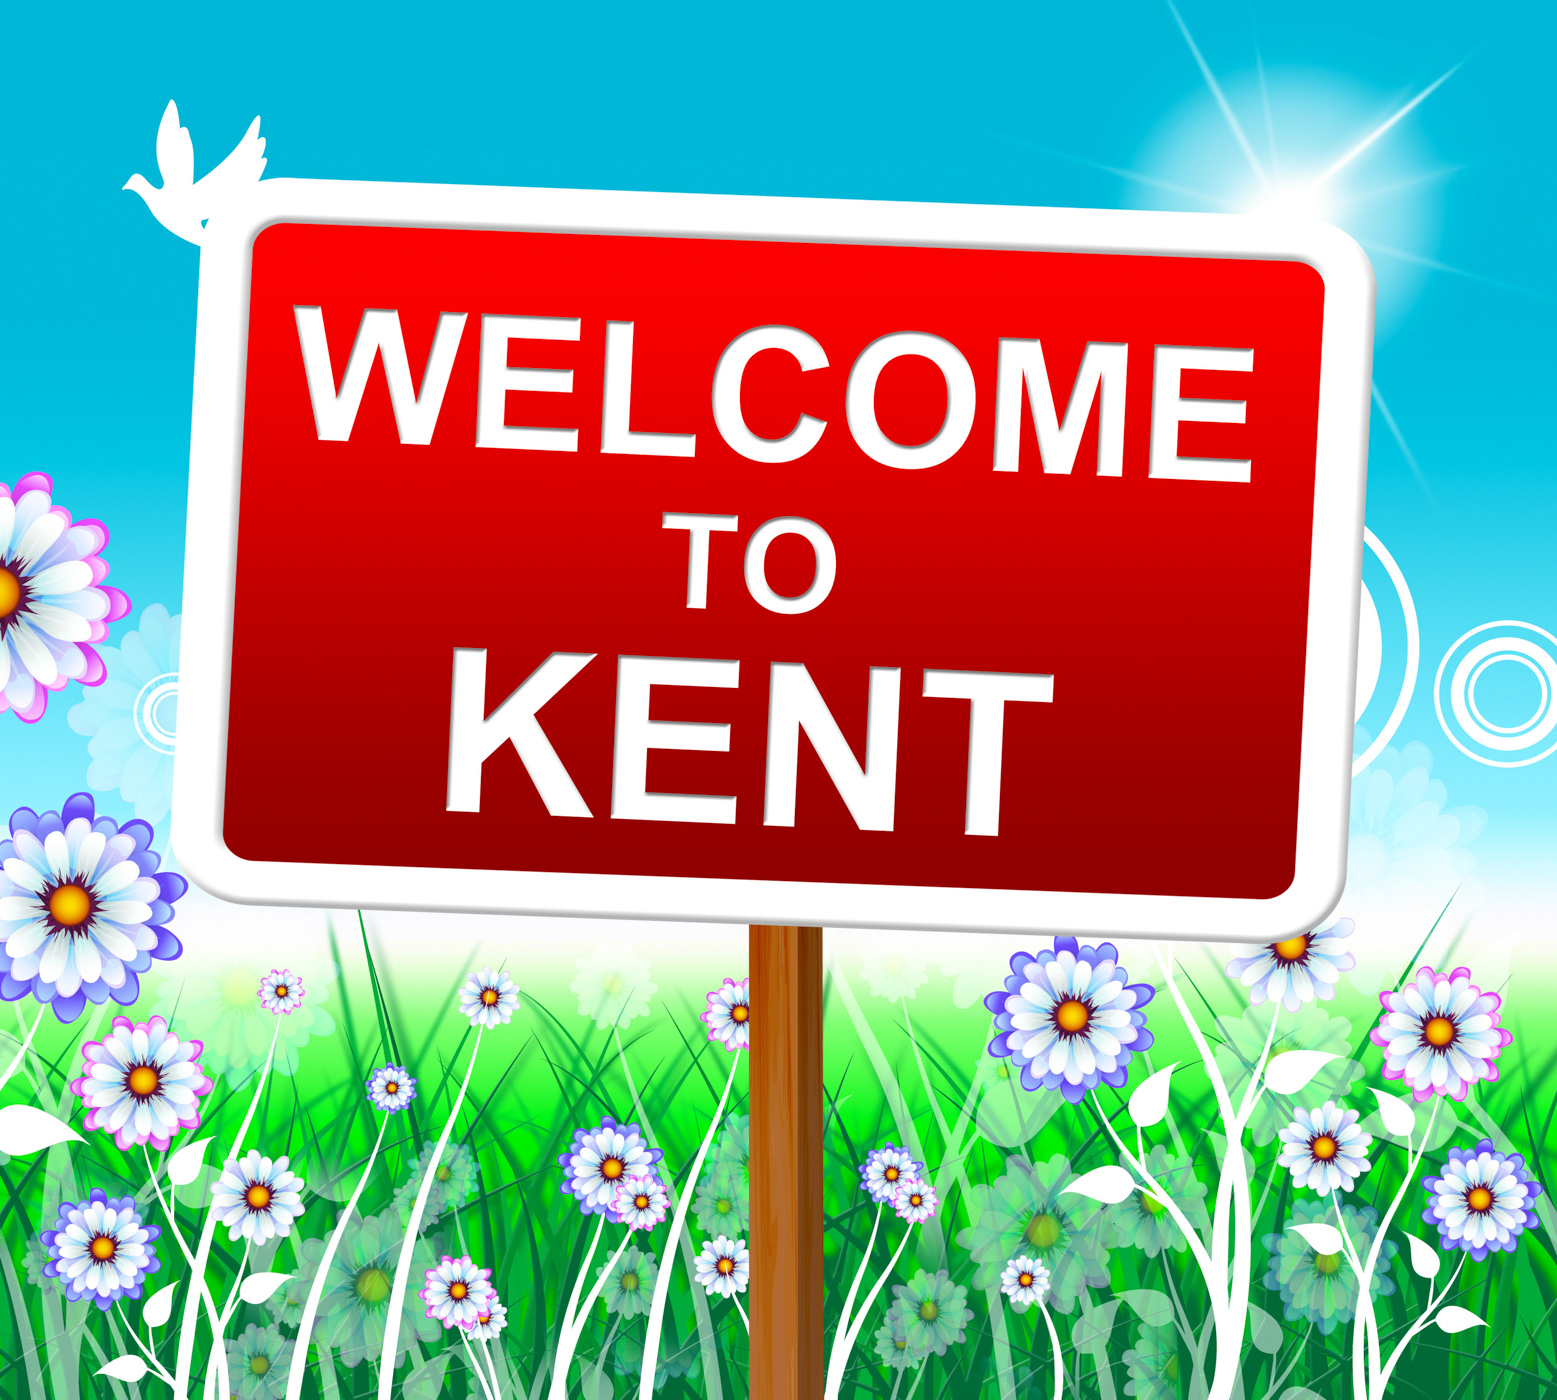 Welcome to kent represents united kingdom and nature photo